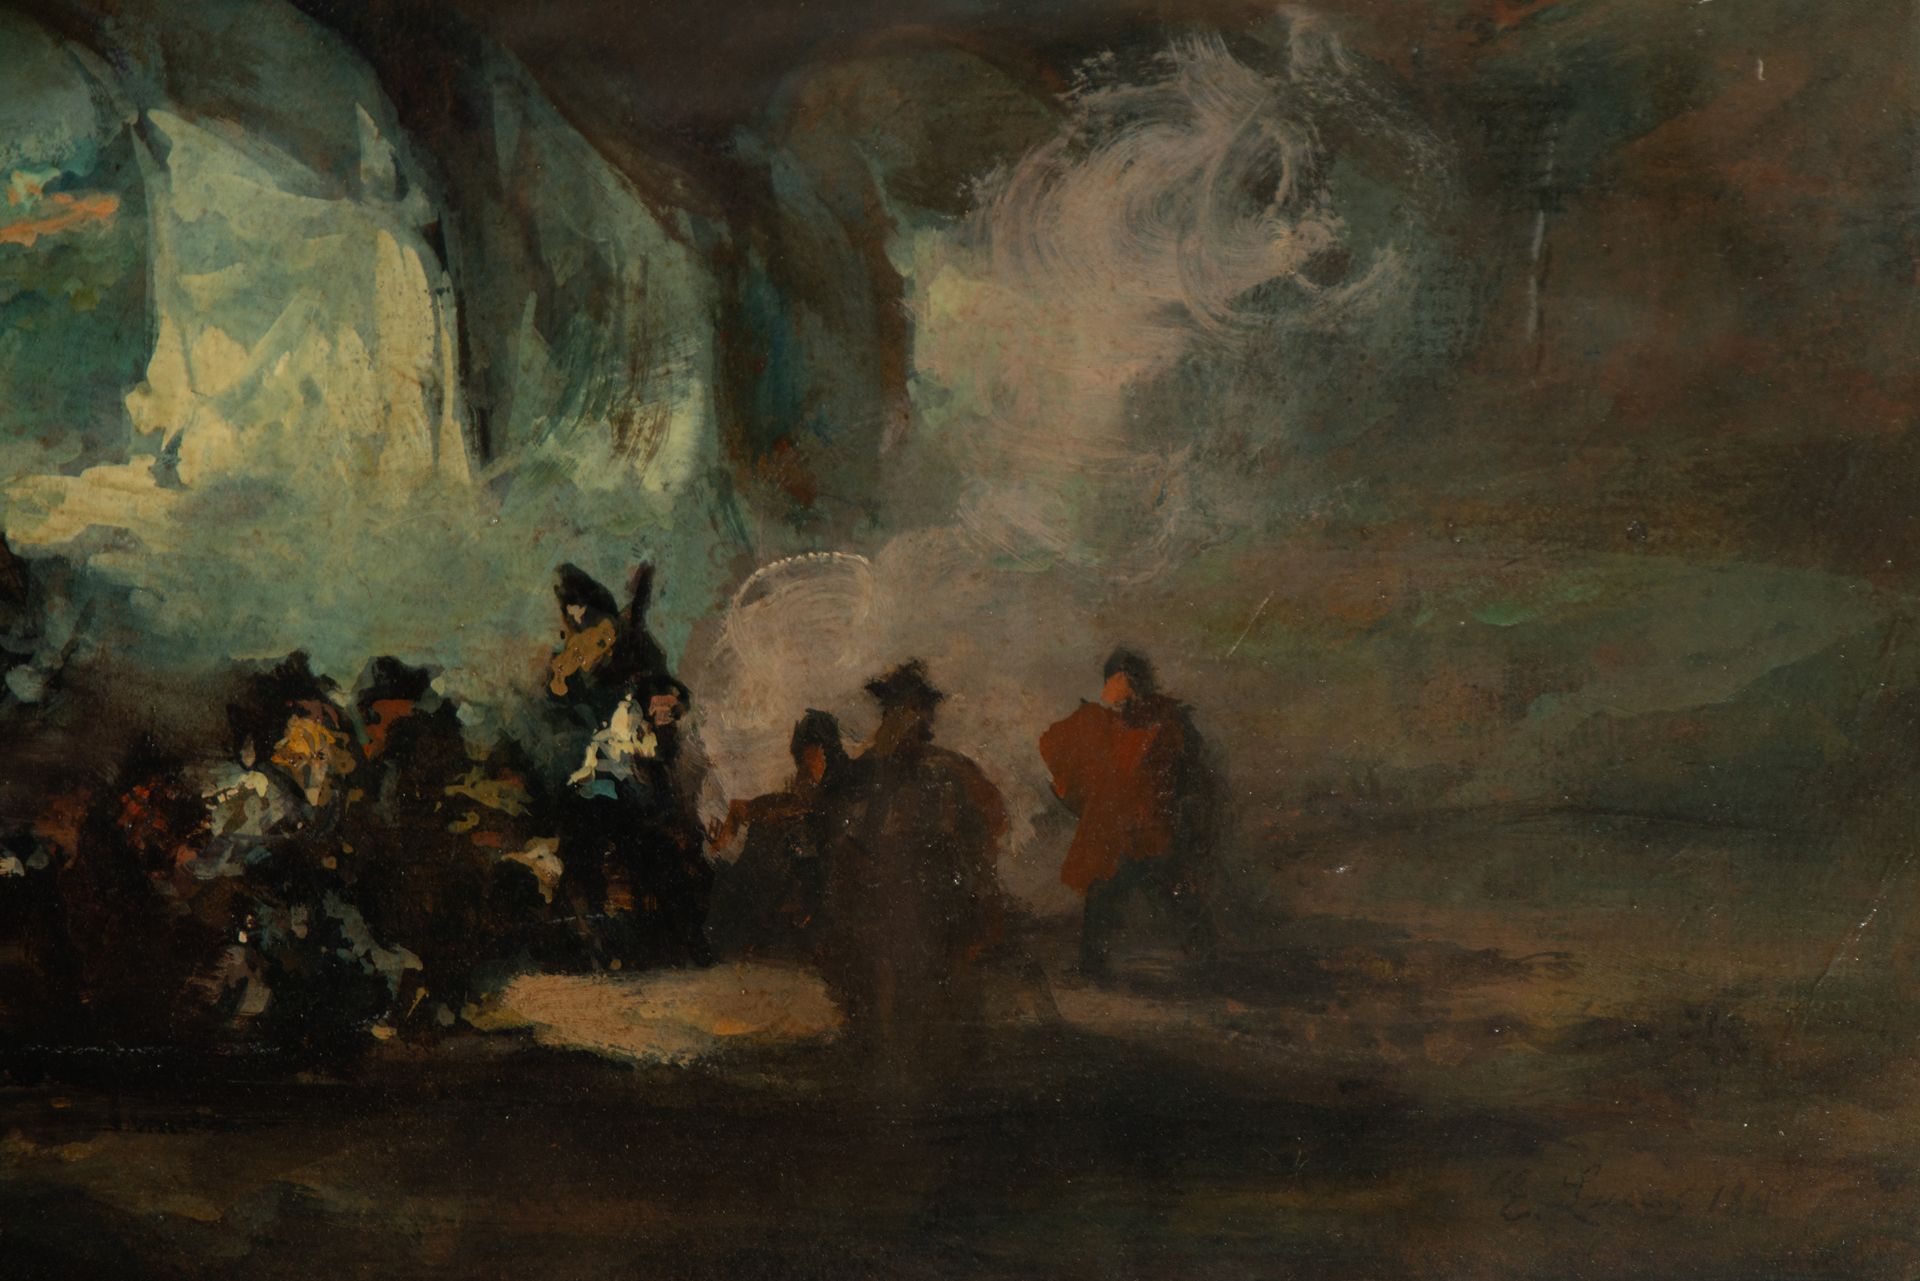 Bandits in the Cave, signed and certified Eugenio Lucas Vilaamil, 1861, 19th century Spanish school - Bild 5 aus 10